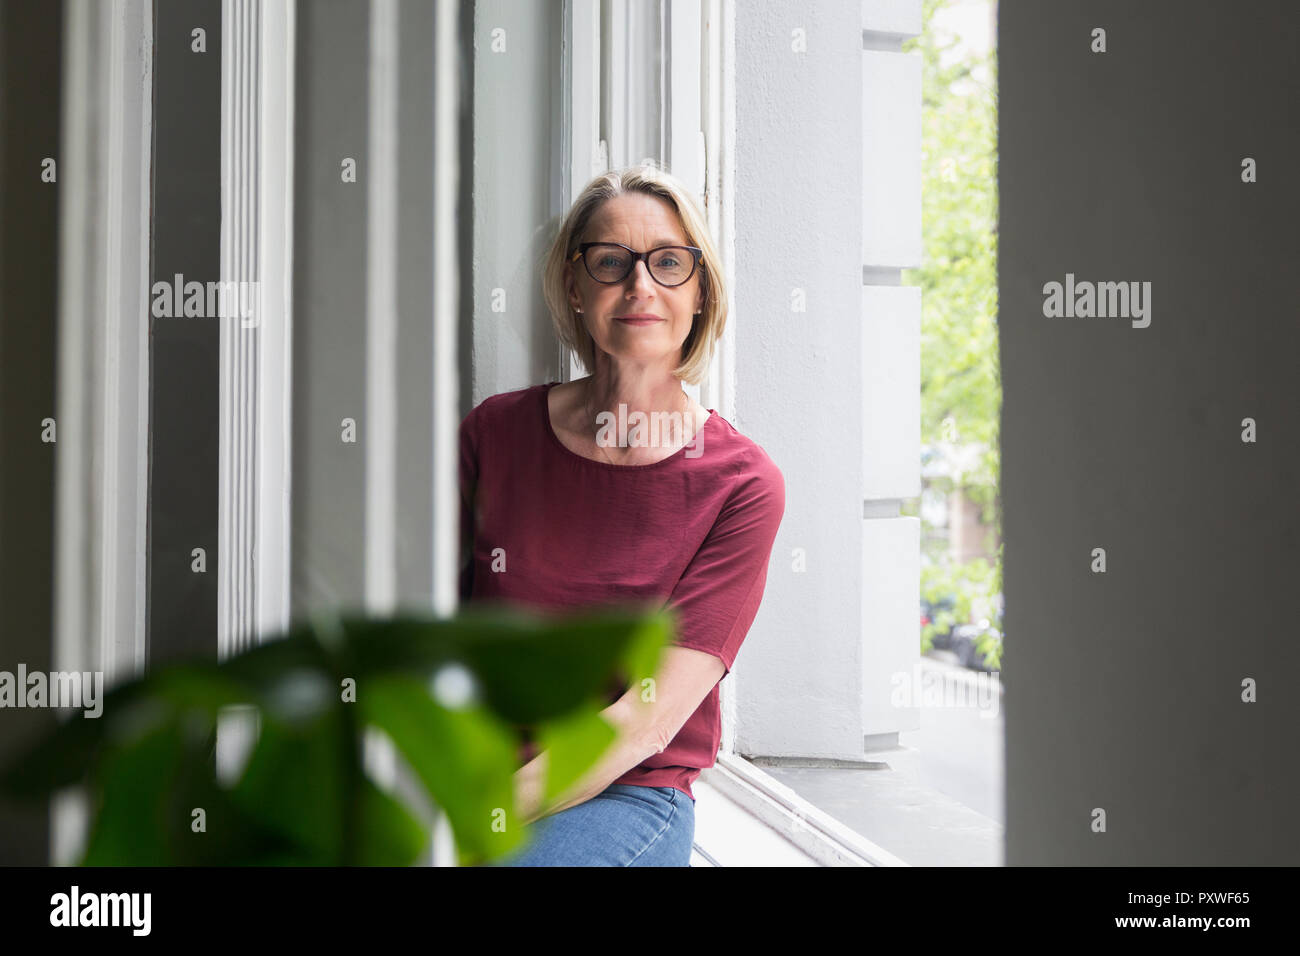 Portait of confident mature woman at the window Stock Photo